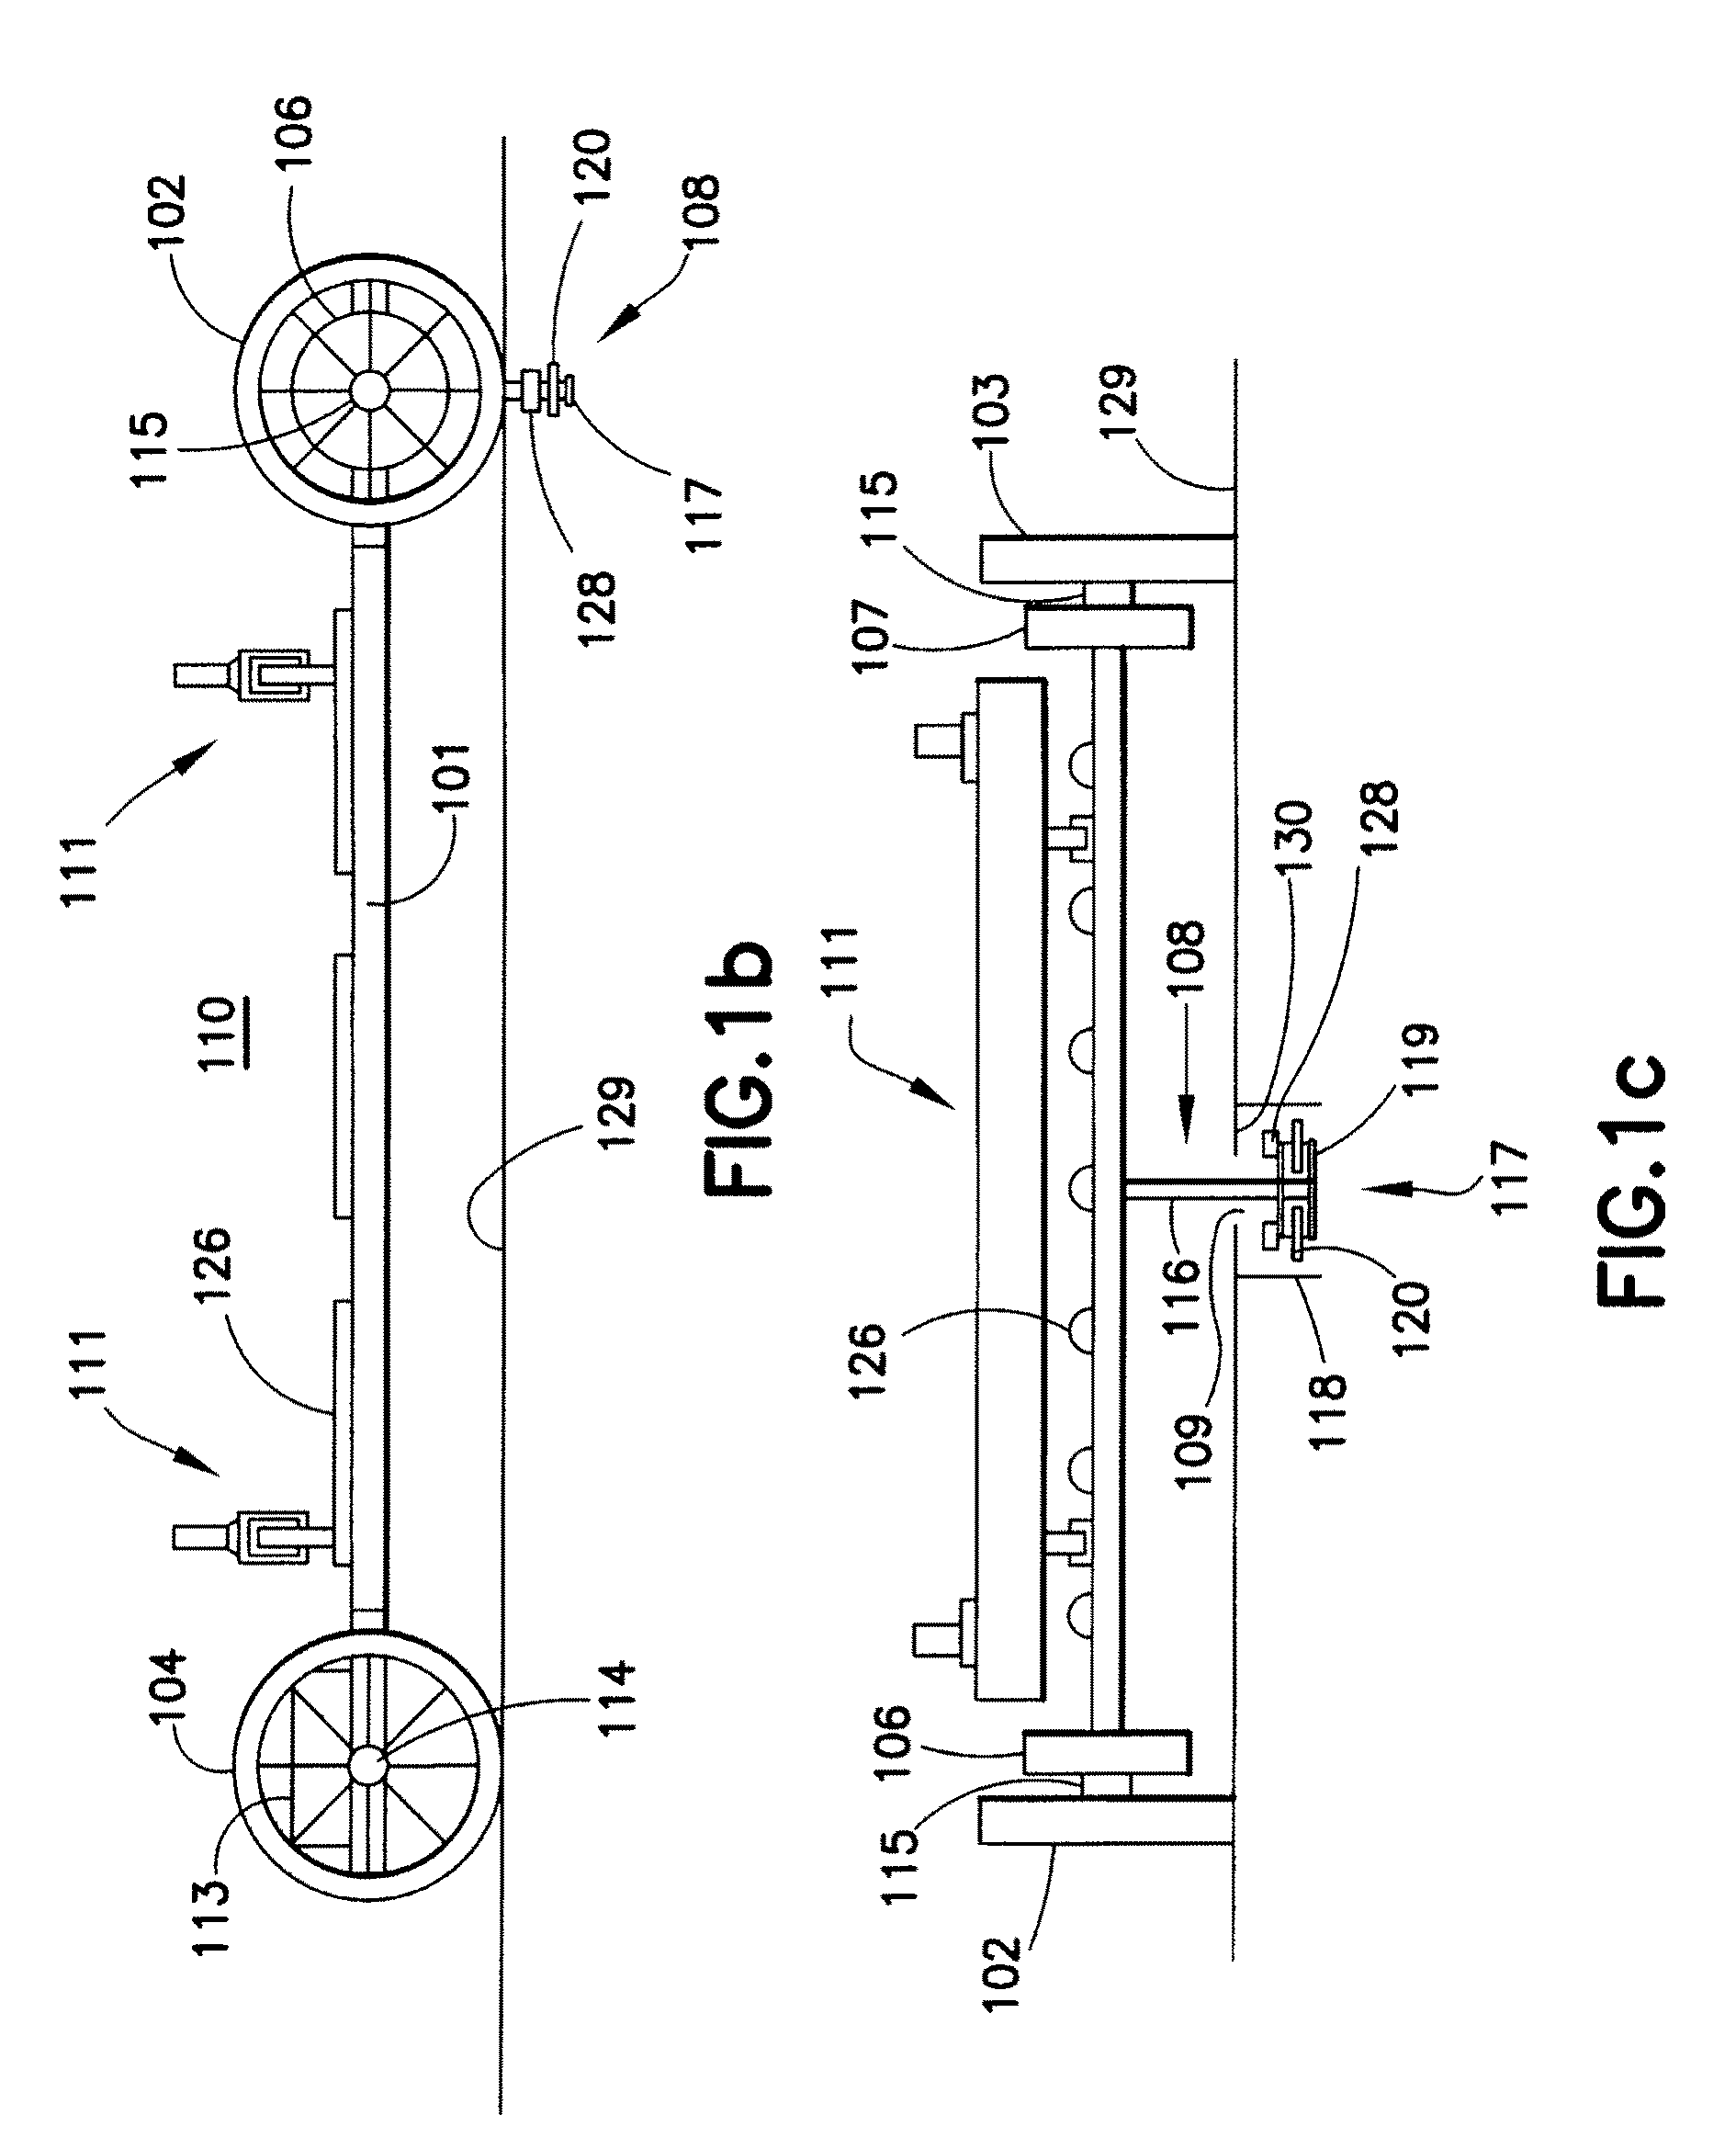 Materials-handling system using autonomous transfer and transport vehicles